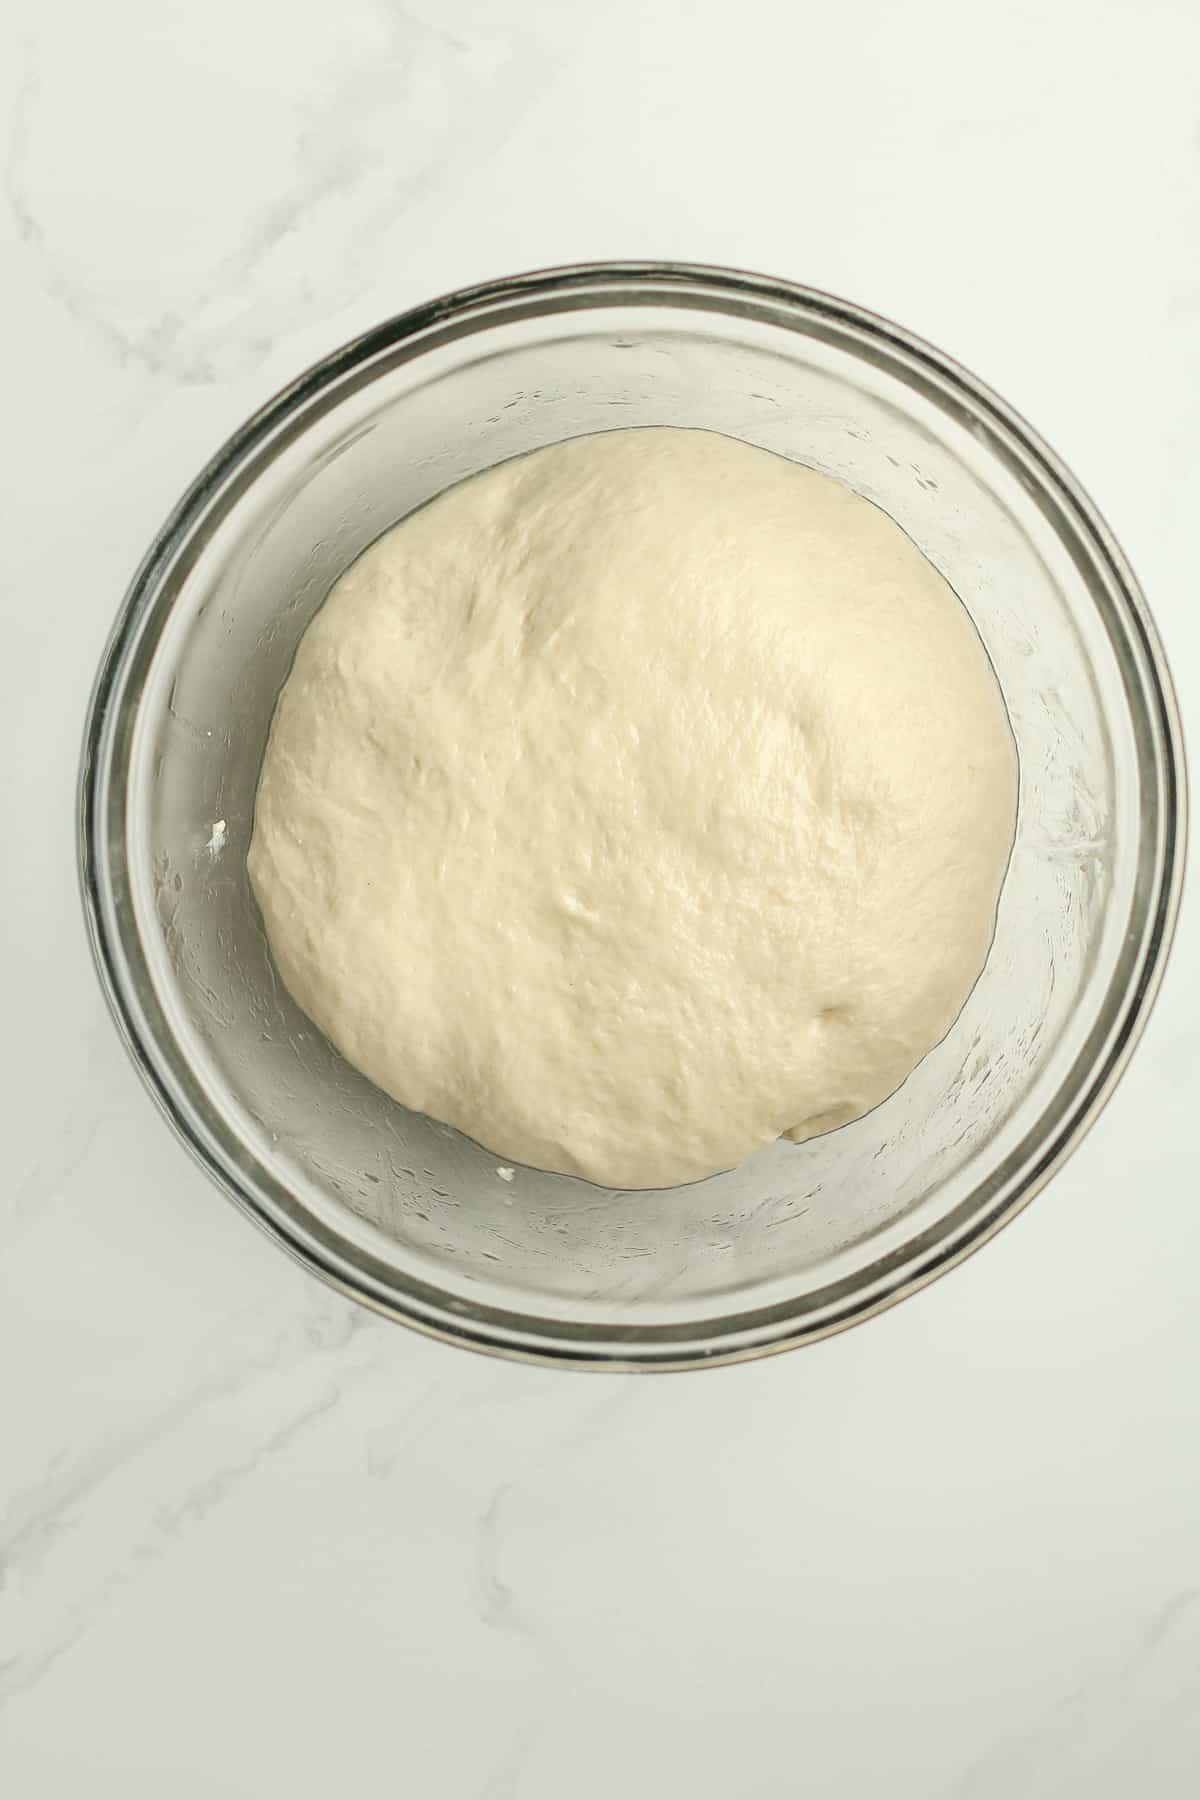 A bowl of the dough before rising.